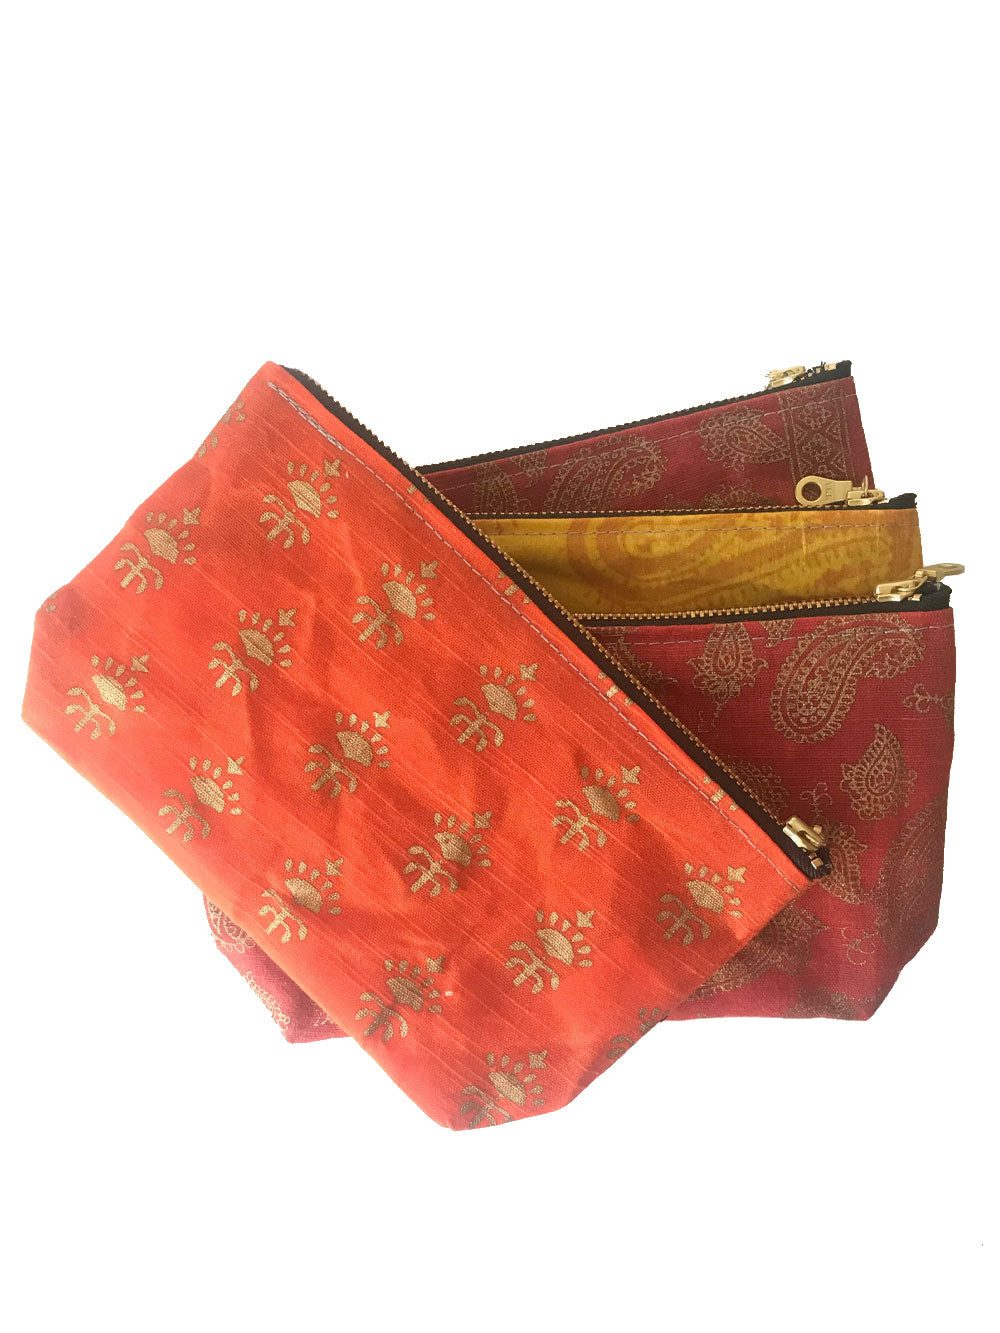 A stacked fan of waxed zippered pouches with brass zippers. From the bottom: red, yellow, red, and orange.